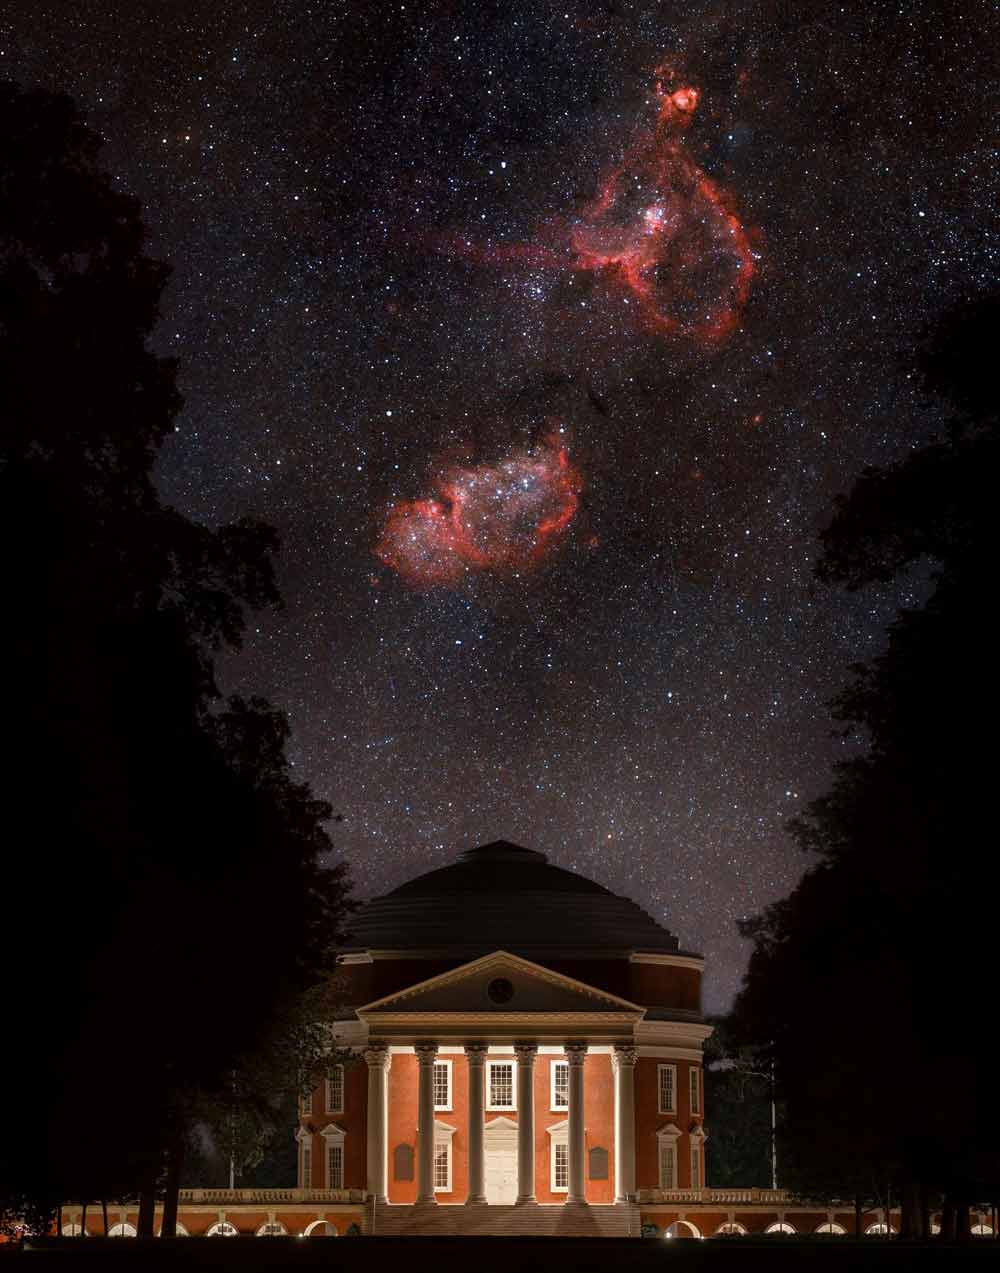 A cloudy, red nebula is visible in the starry night sky over the Rotunda